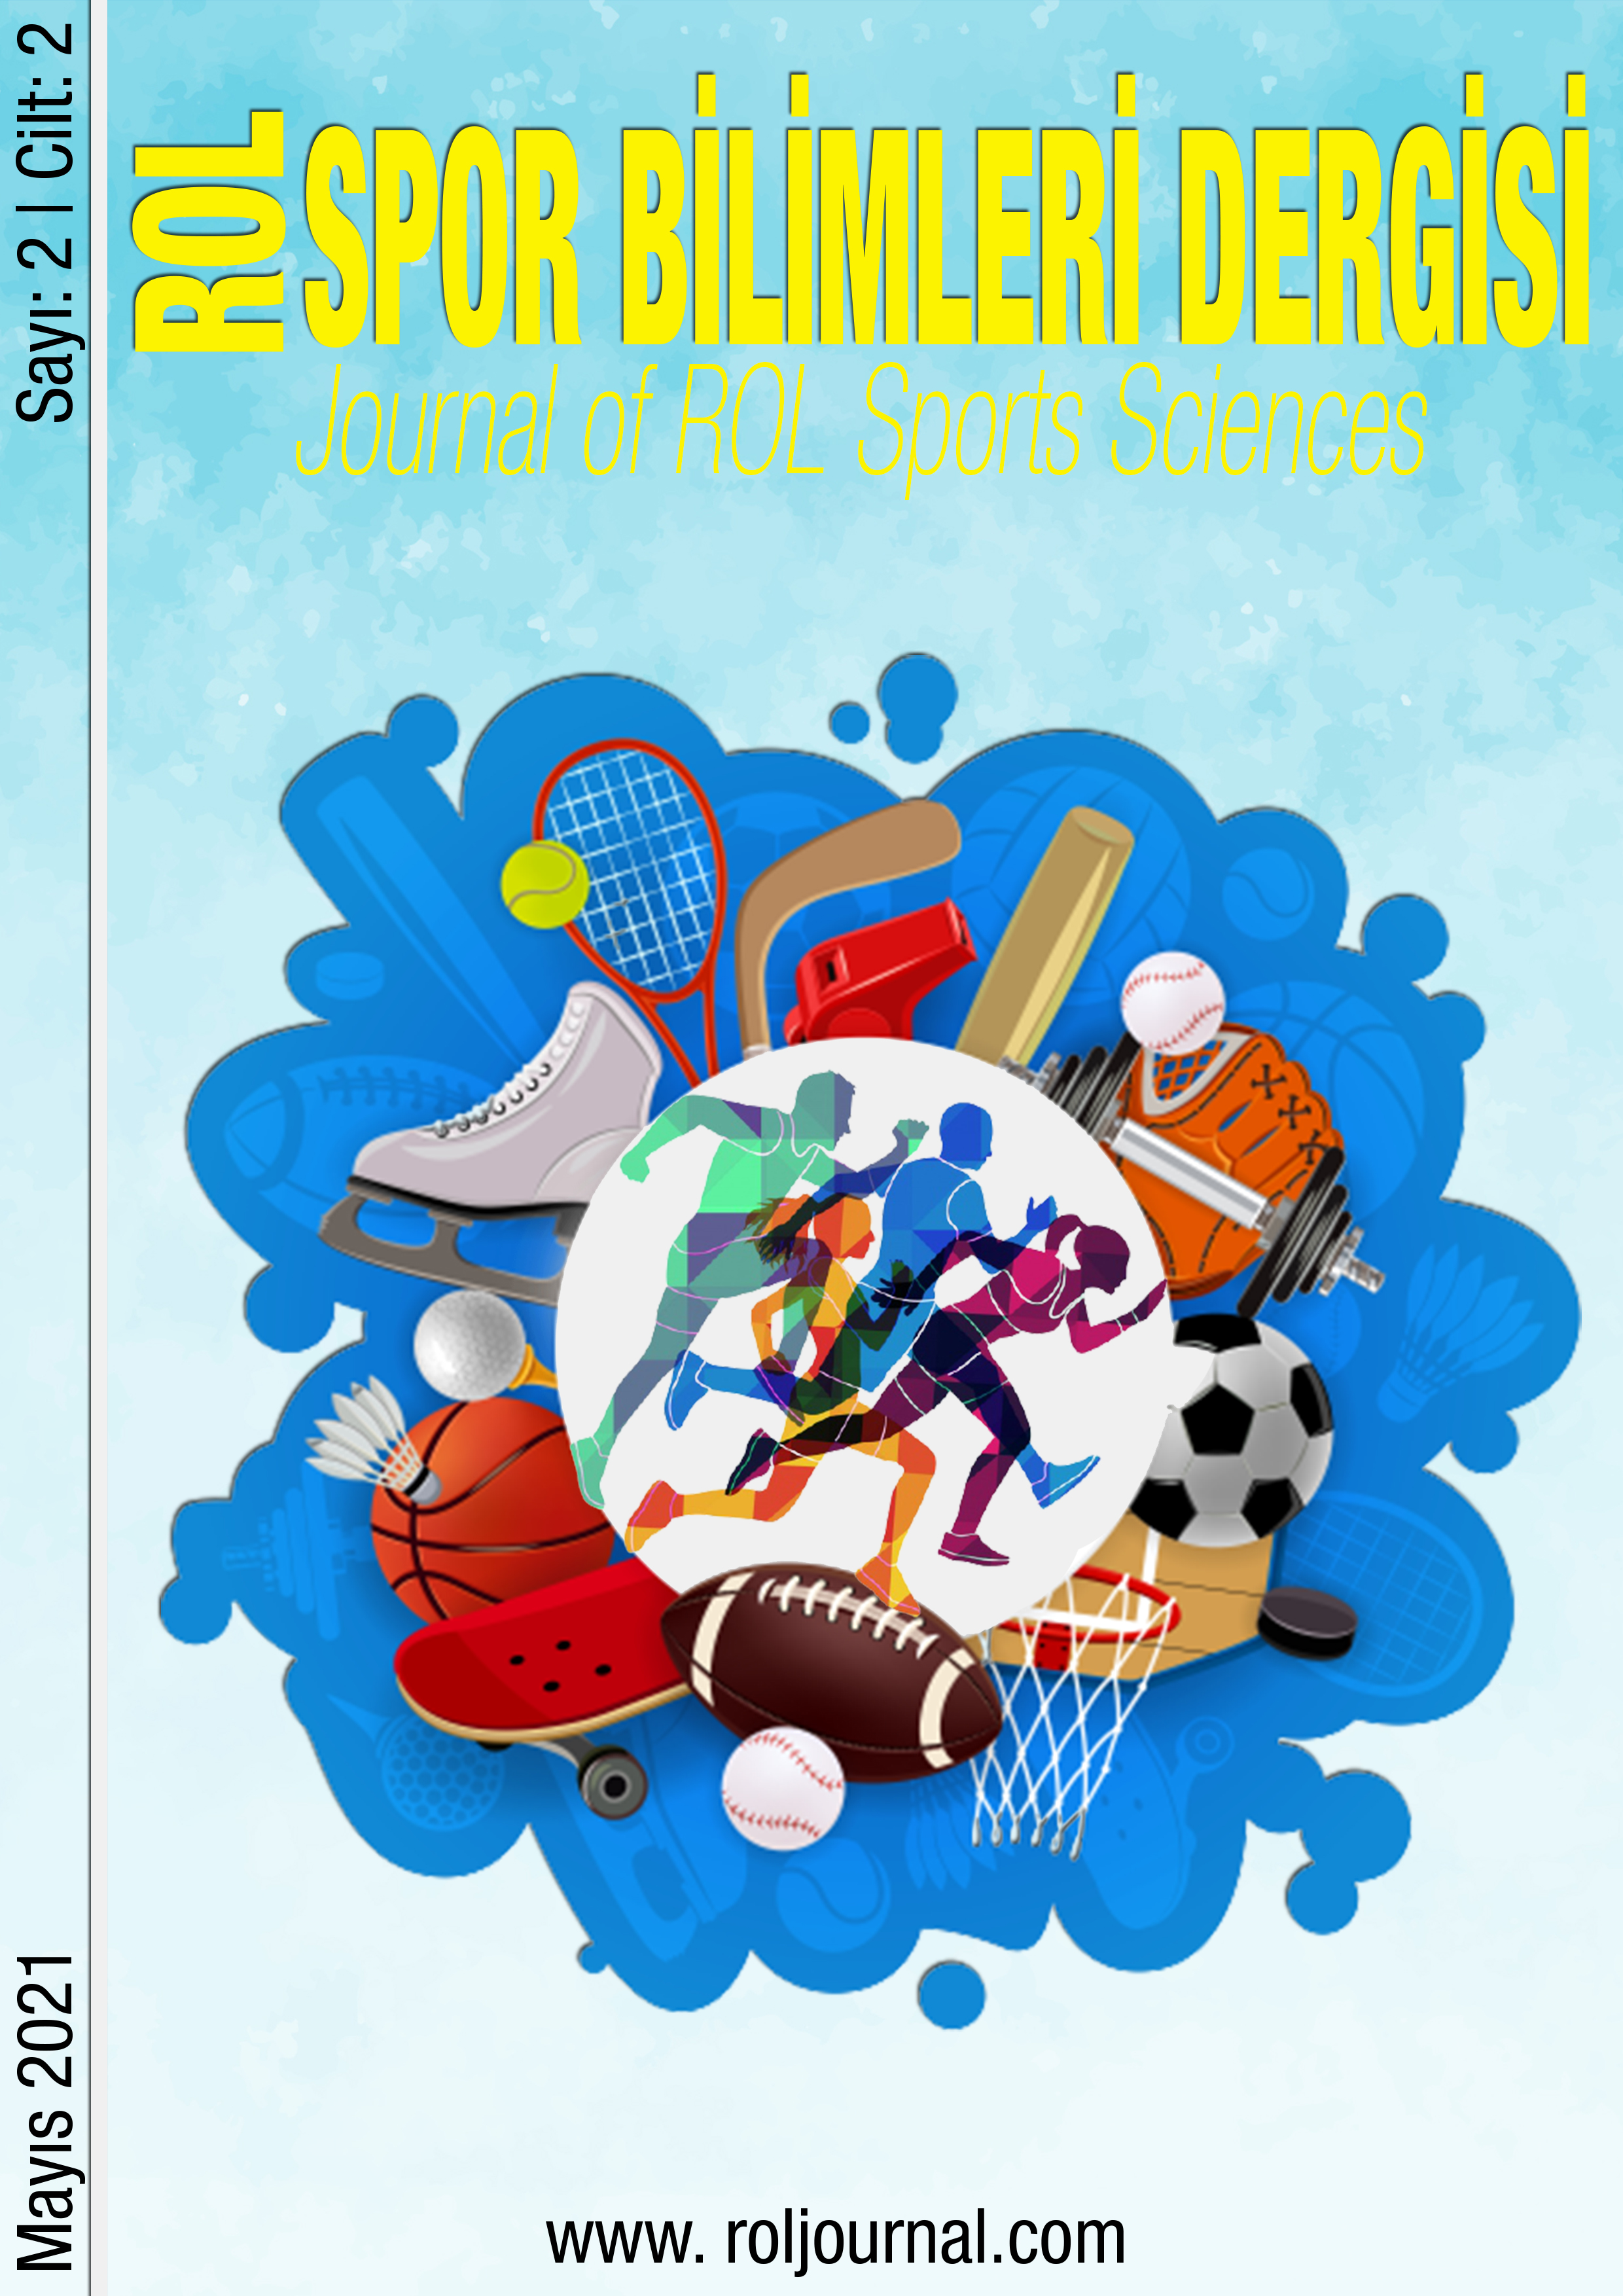 					View Vol. 2 No. 2 (2021): Journal of ROL Sports Sciences
				